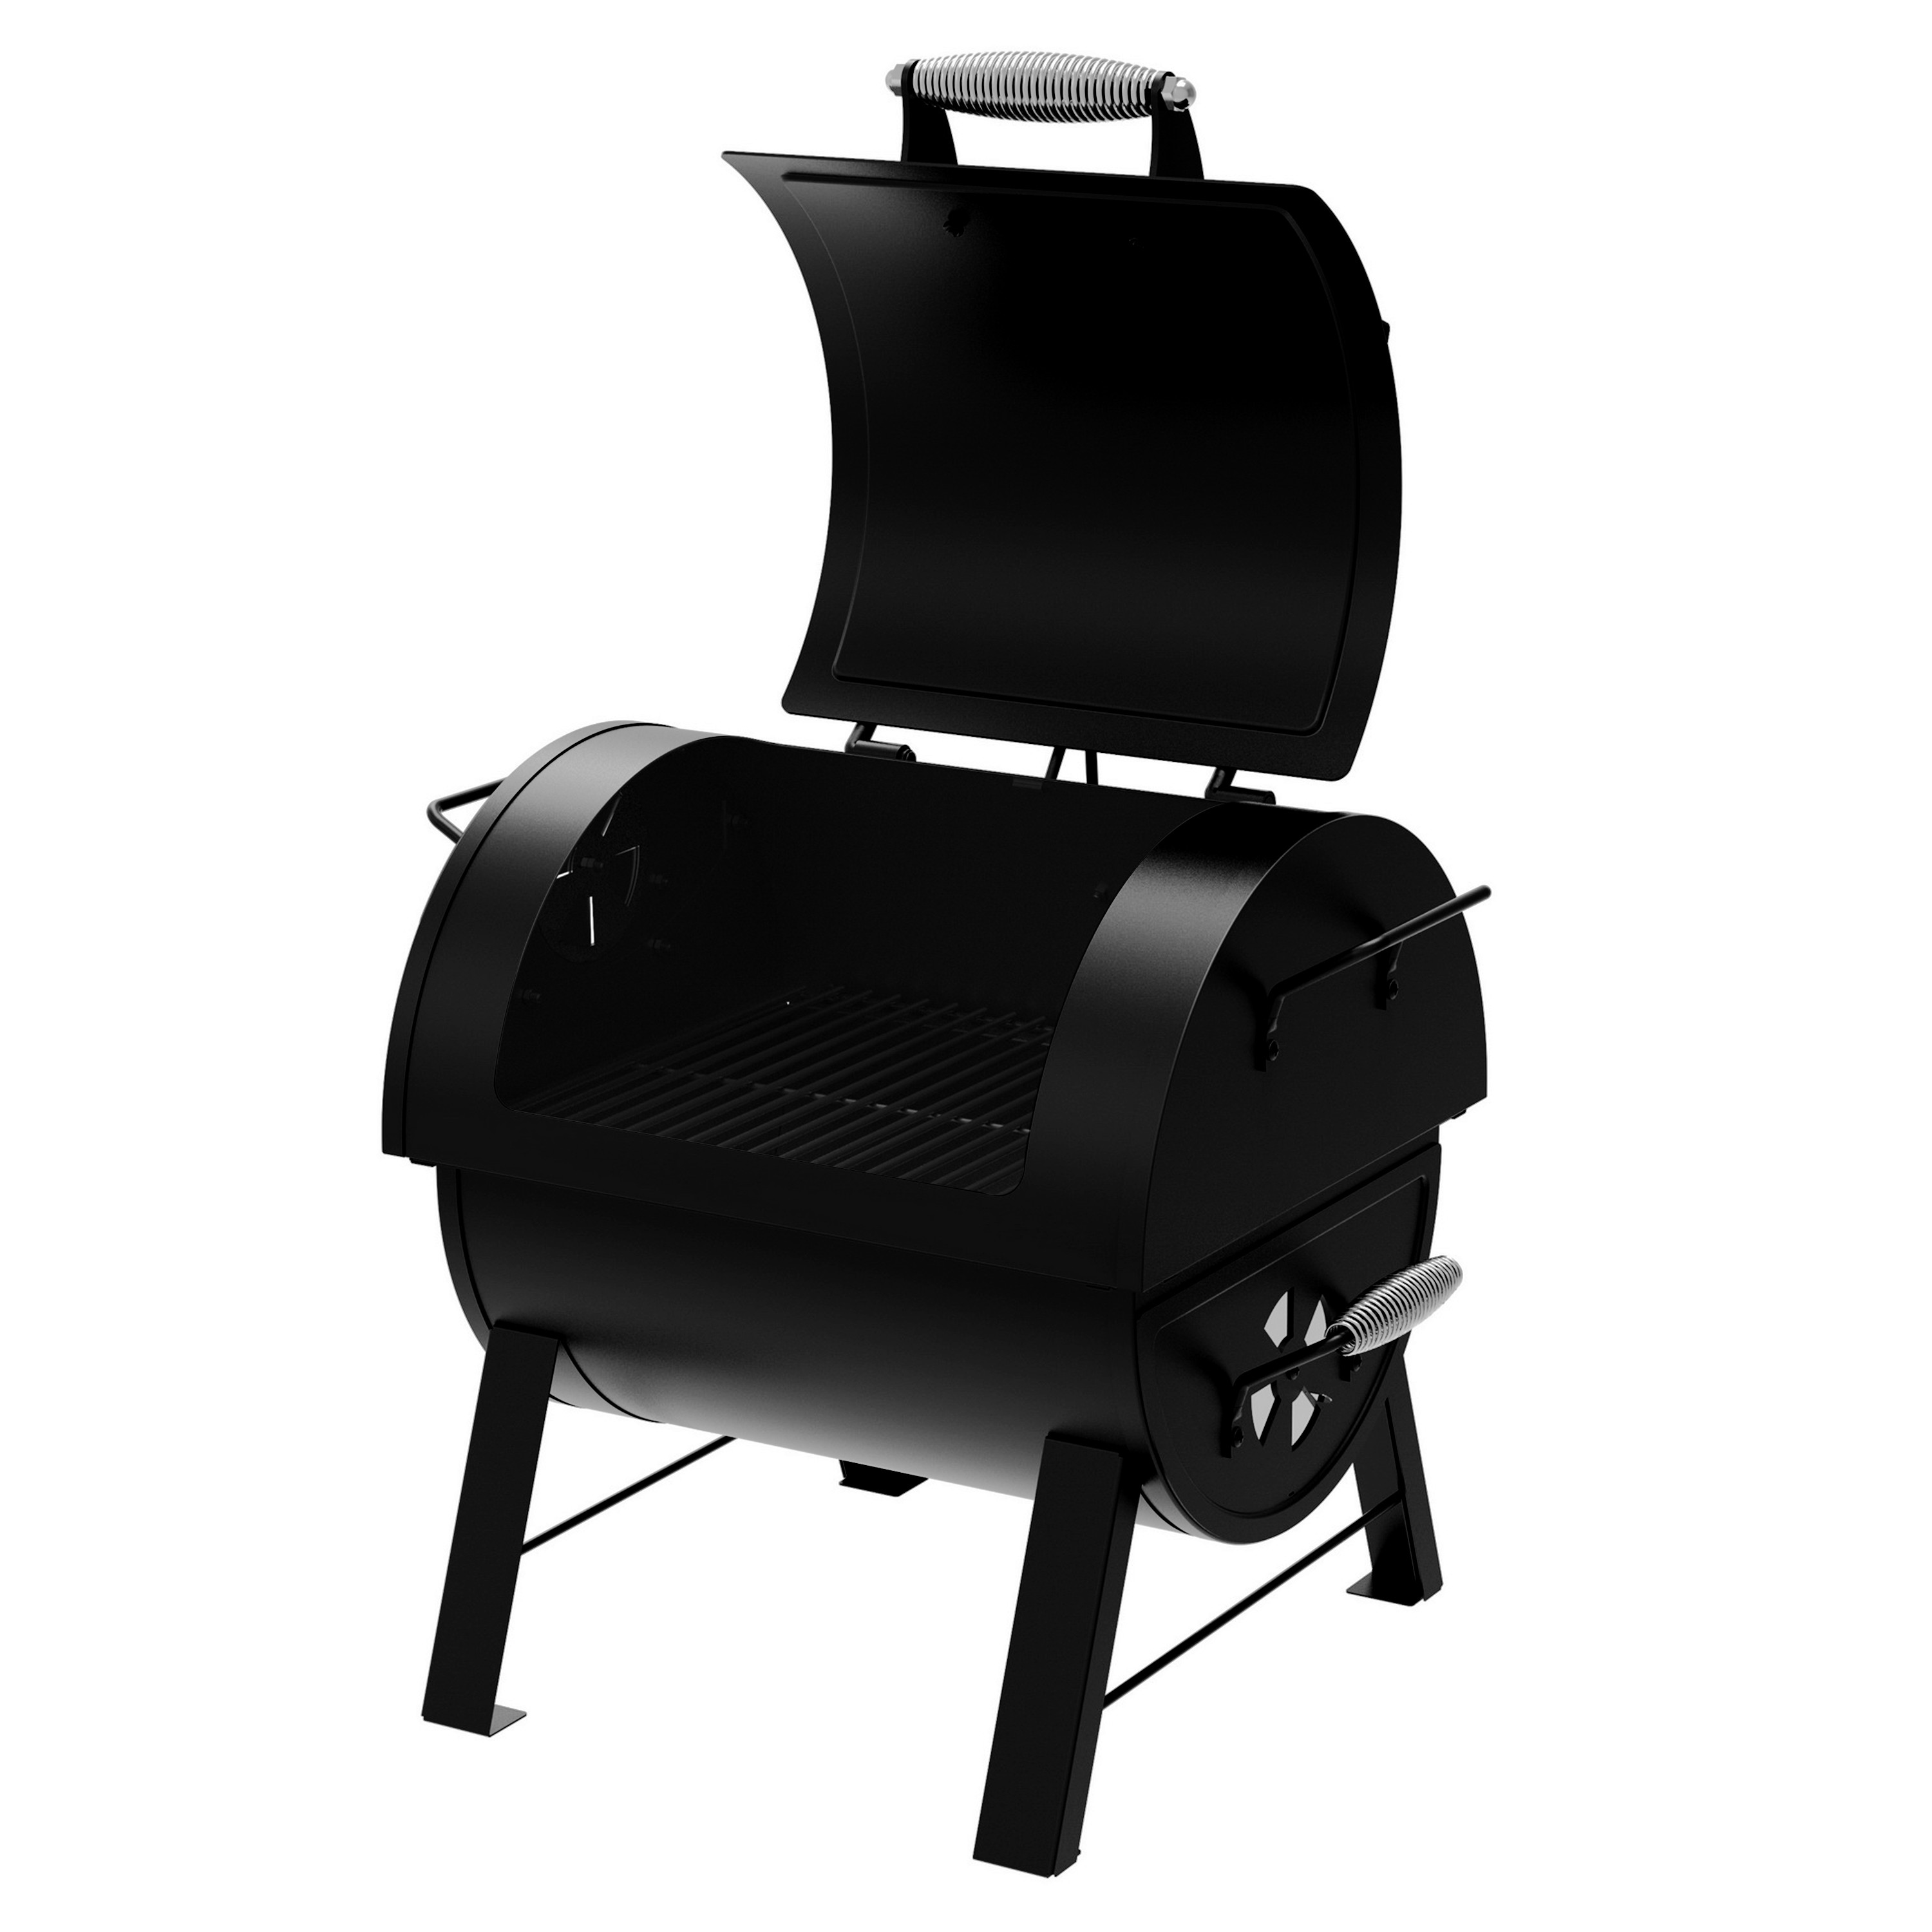 Dyna-Glo Portable Tabletop Charcoal Grill & Side Firebox - image 5 of 11